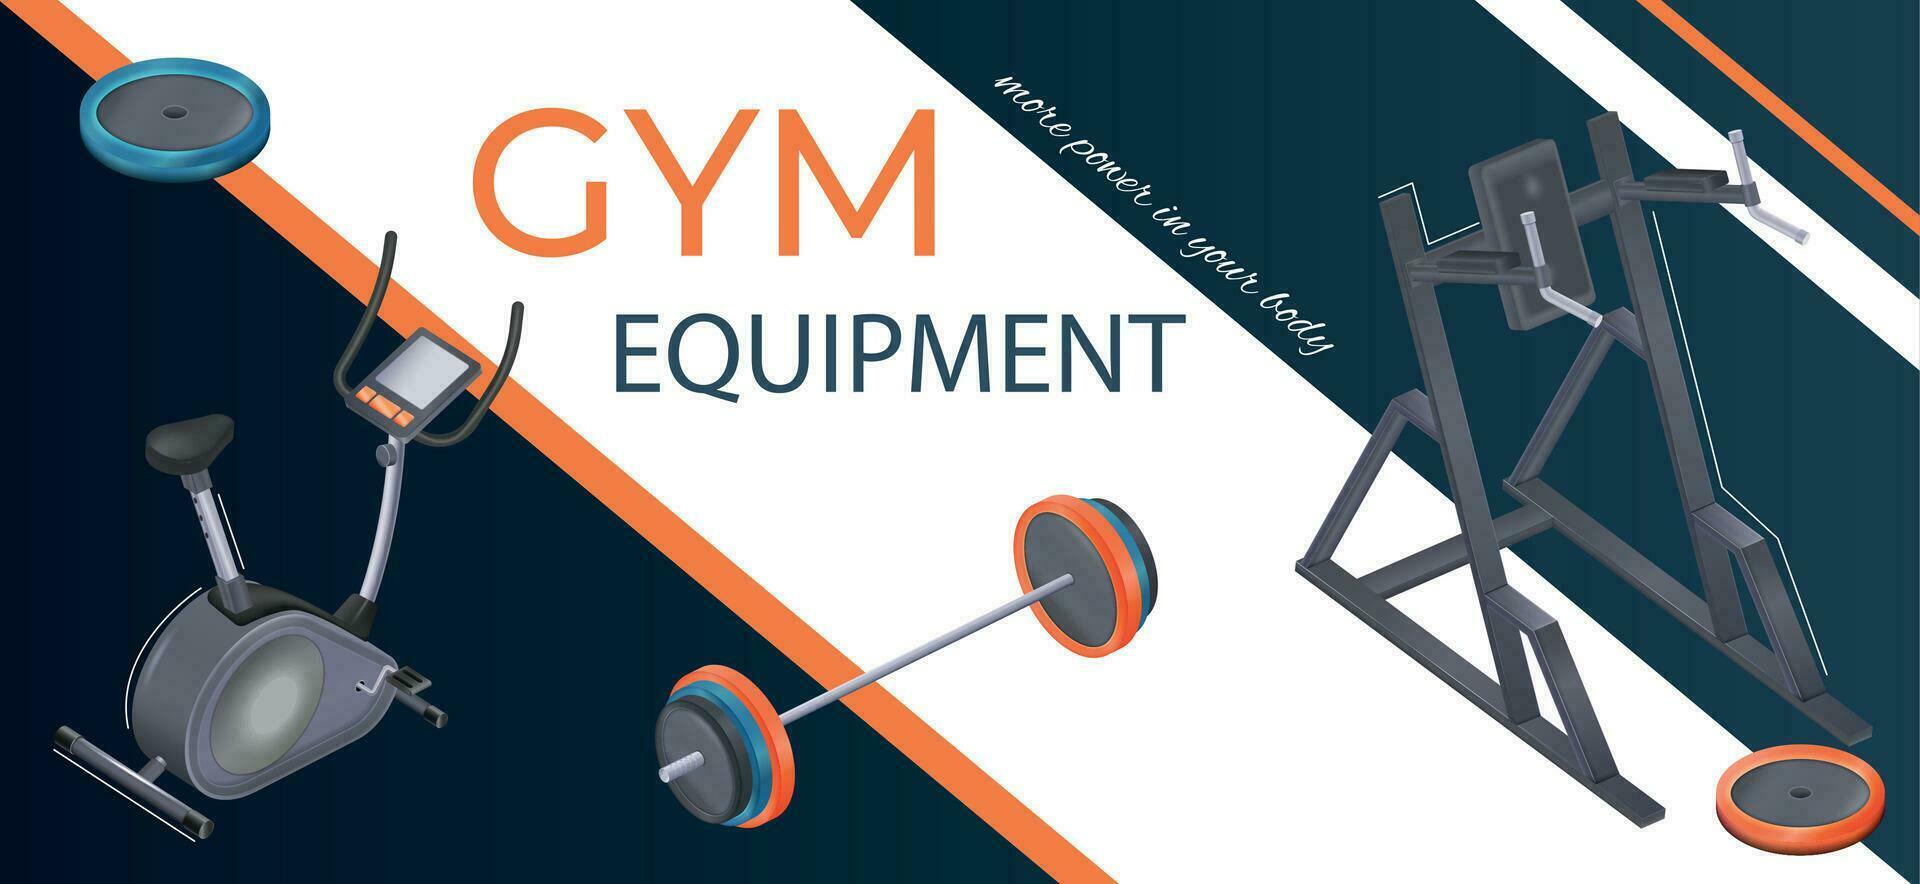 Gym Equipment Collage vector